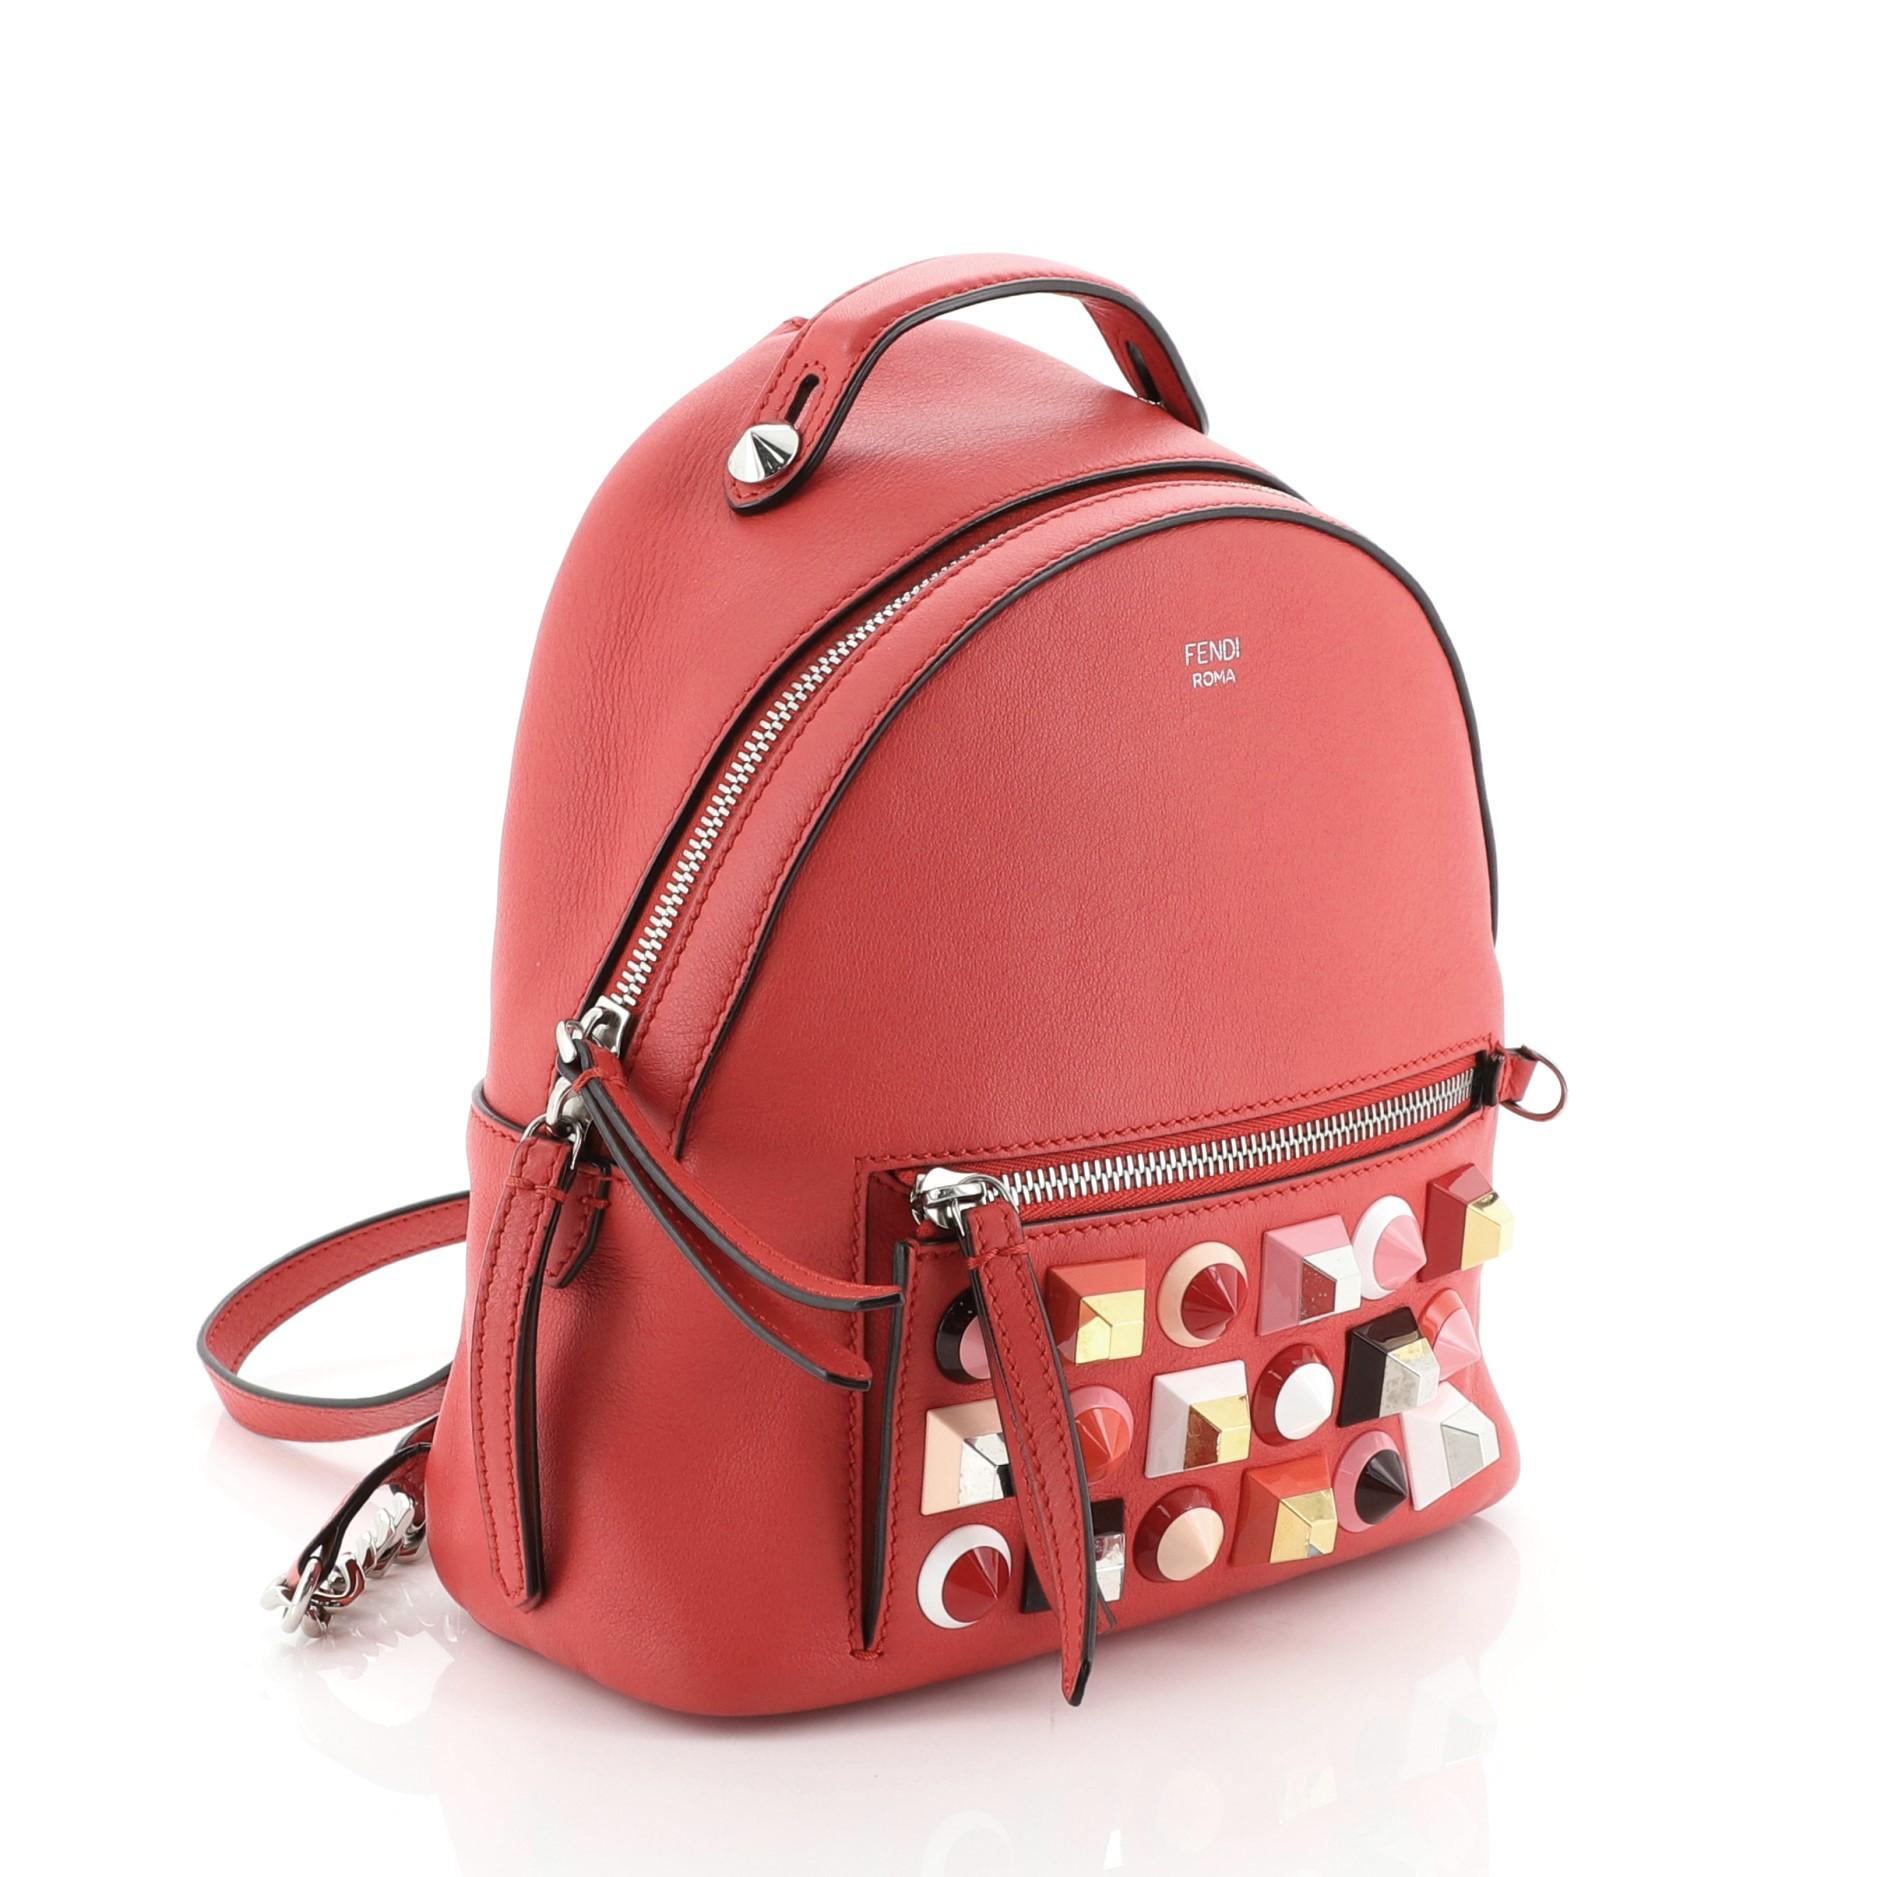 This Fendi By The Way Backpack Studded Leather Mini, crafted in red leather, features oversize studs, leather top handle, adjustable leather straps, exterior front zip pocket and silver-tone hardware. Its zip closure opens to a black fabric interior